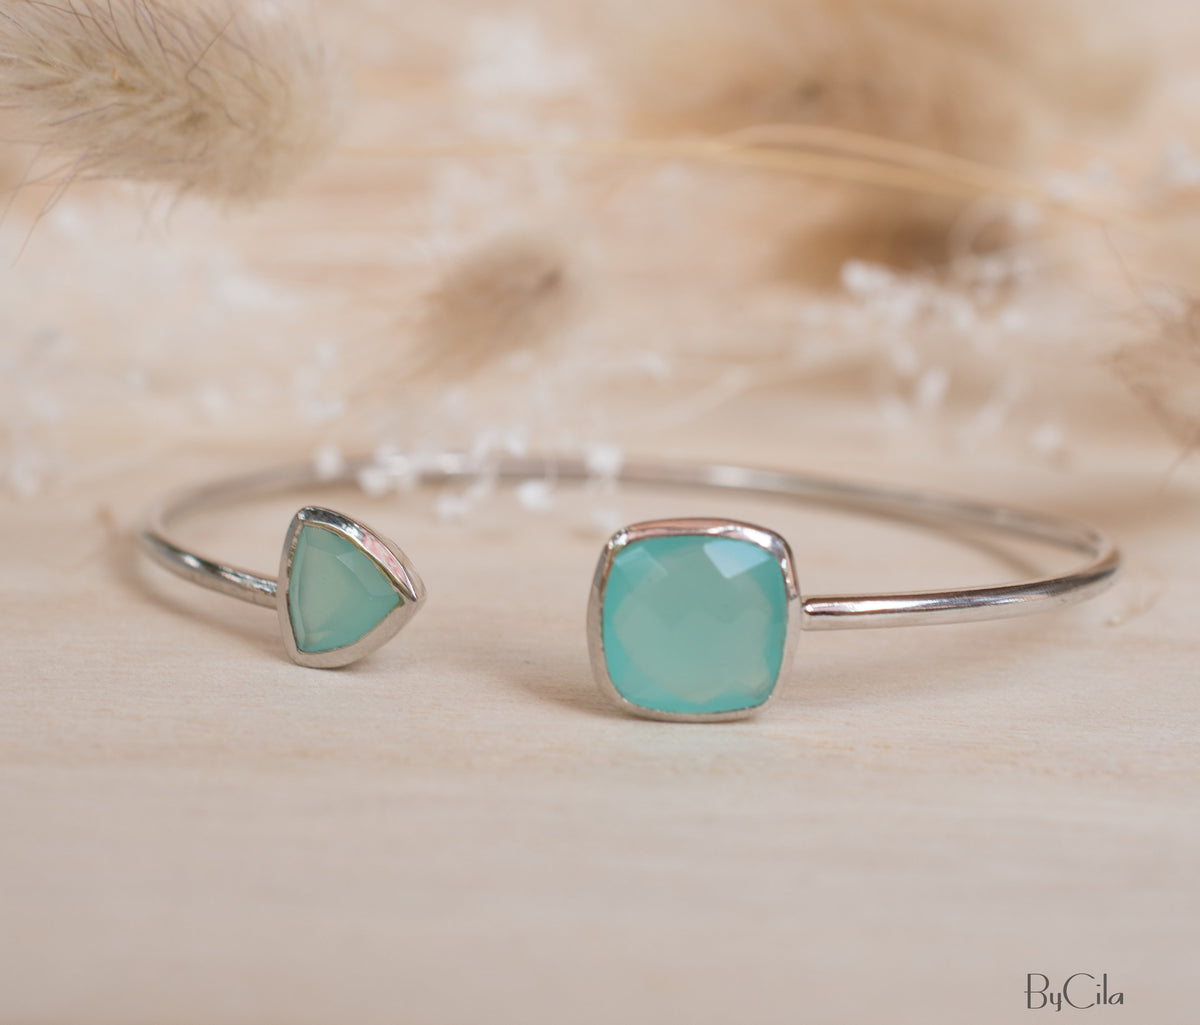 Aqua Chalcedony Bohemian Bangle Bracelet * Gold Plated 18k or Silver Plated *Gemstone * Gypsy * Adjustable * Statement * Stacking *BJB006A